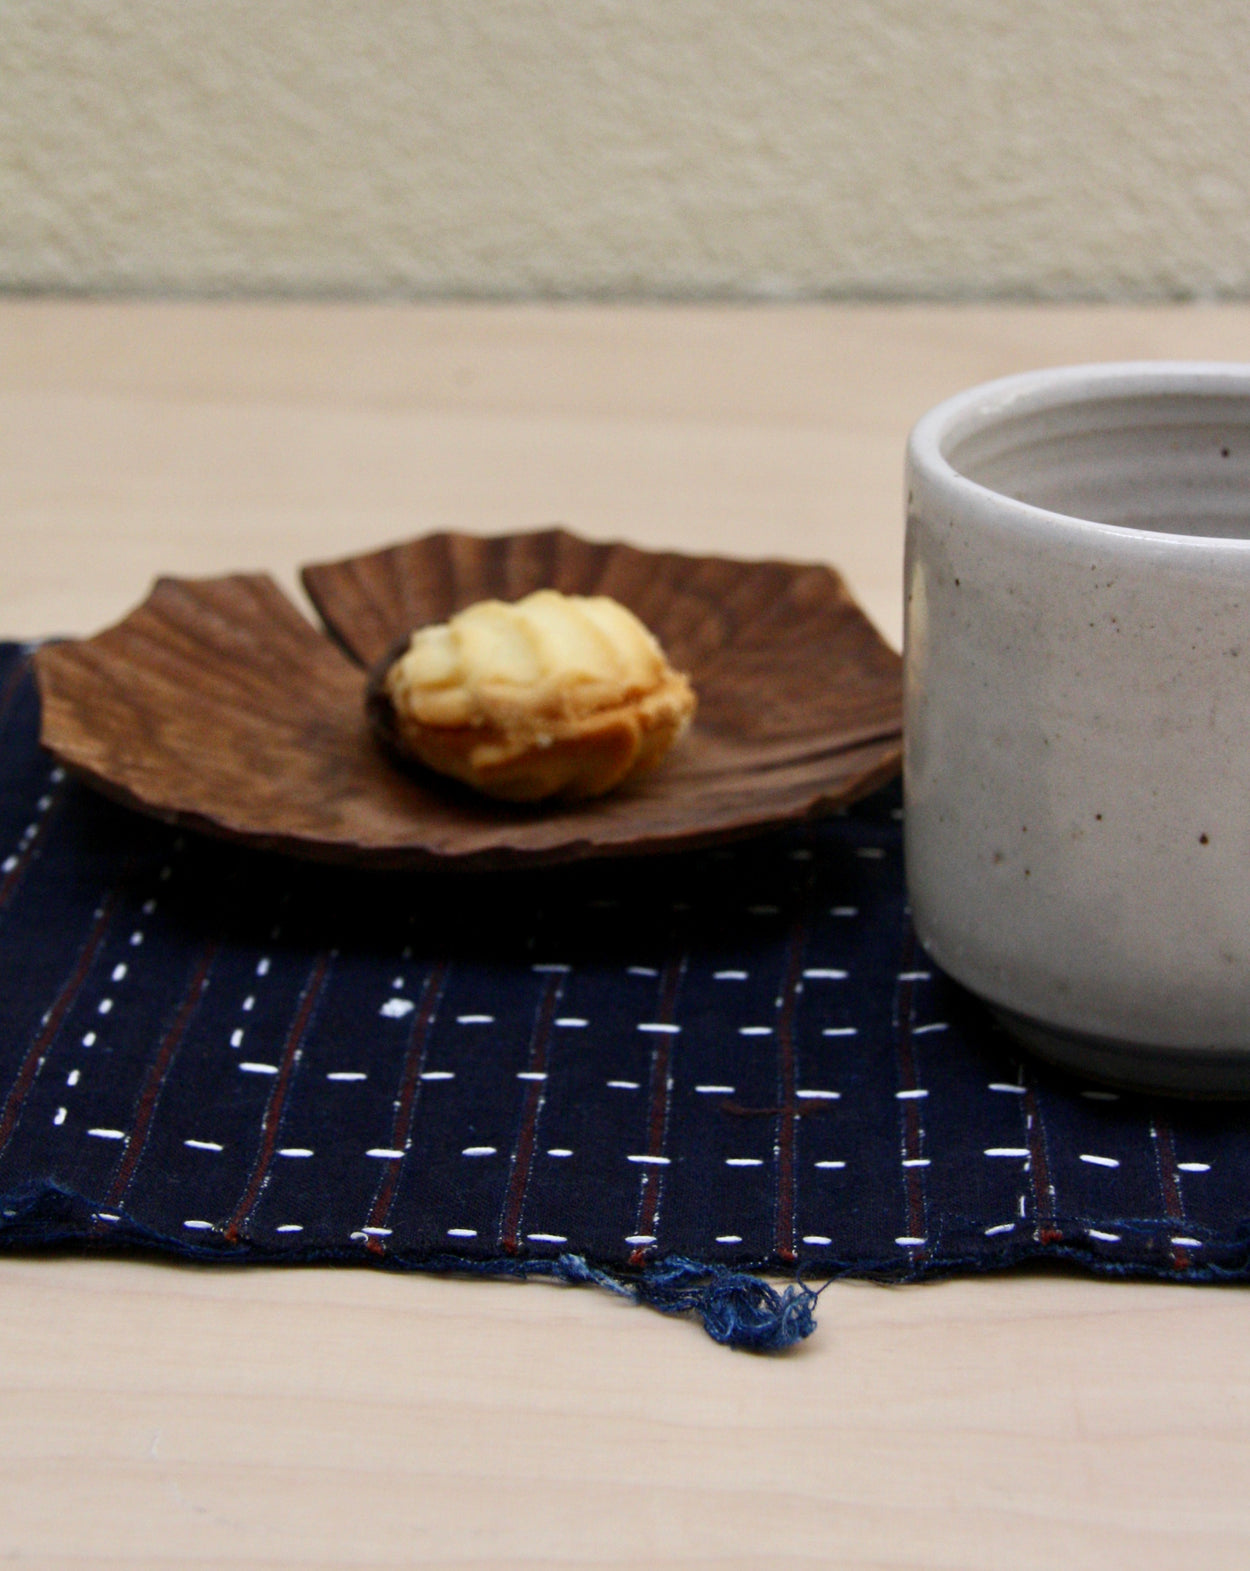 Vintage Japanese Indigo Placemat with wood lotus plate and handmade ceramic cup by Richard Beauchamp